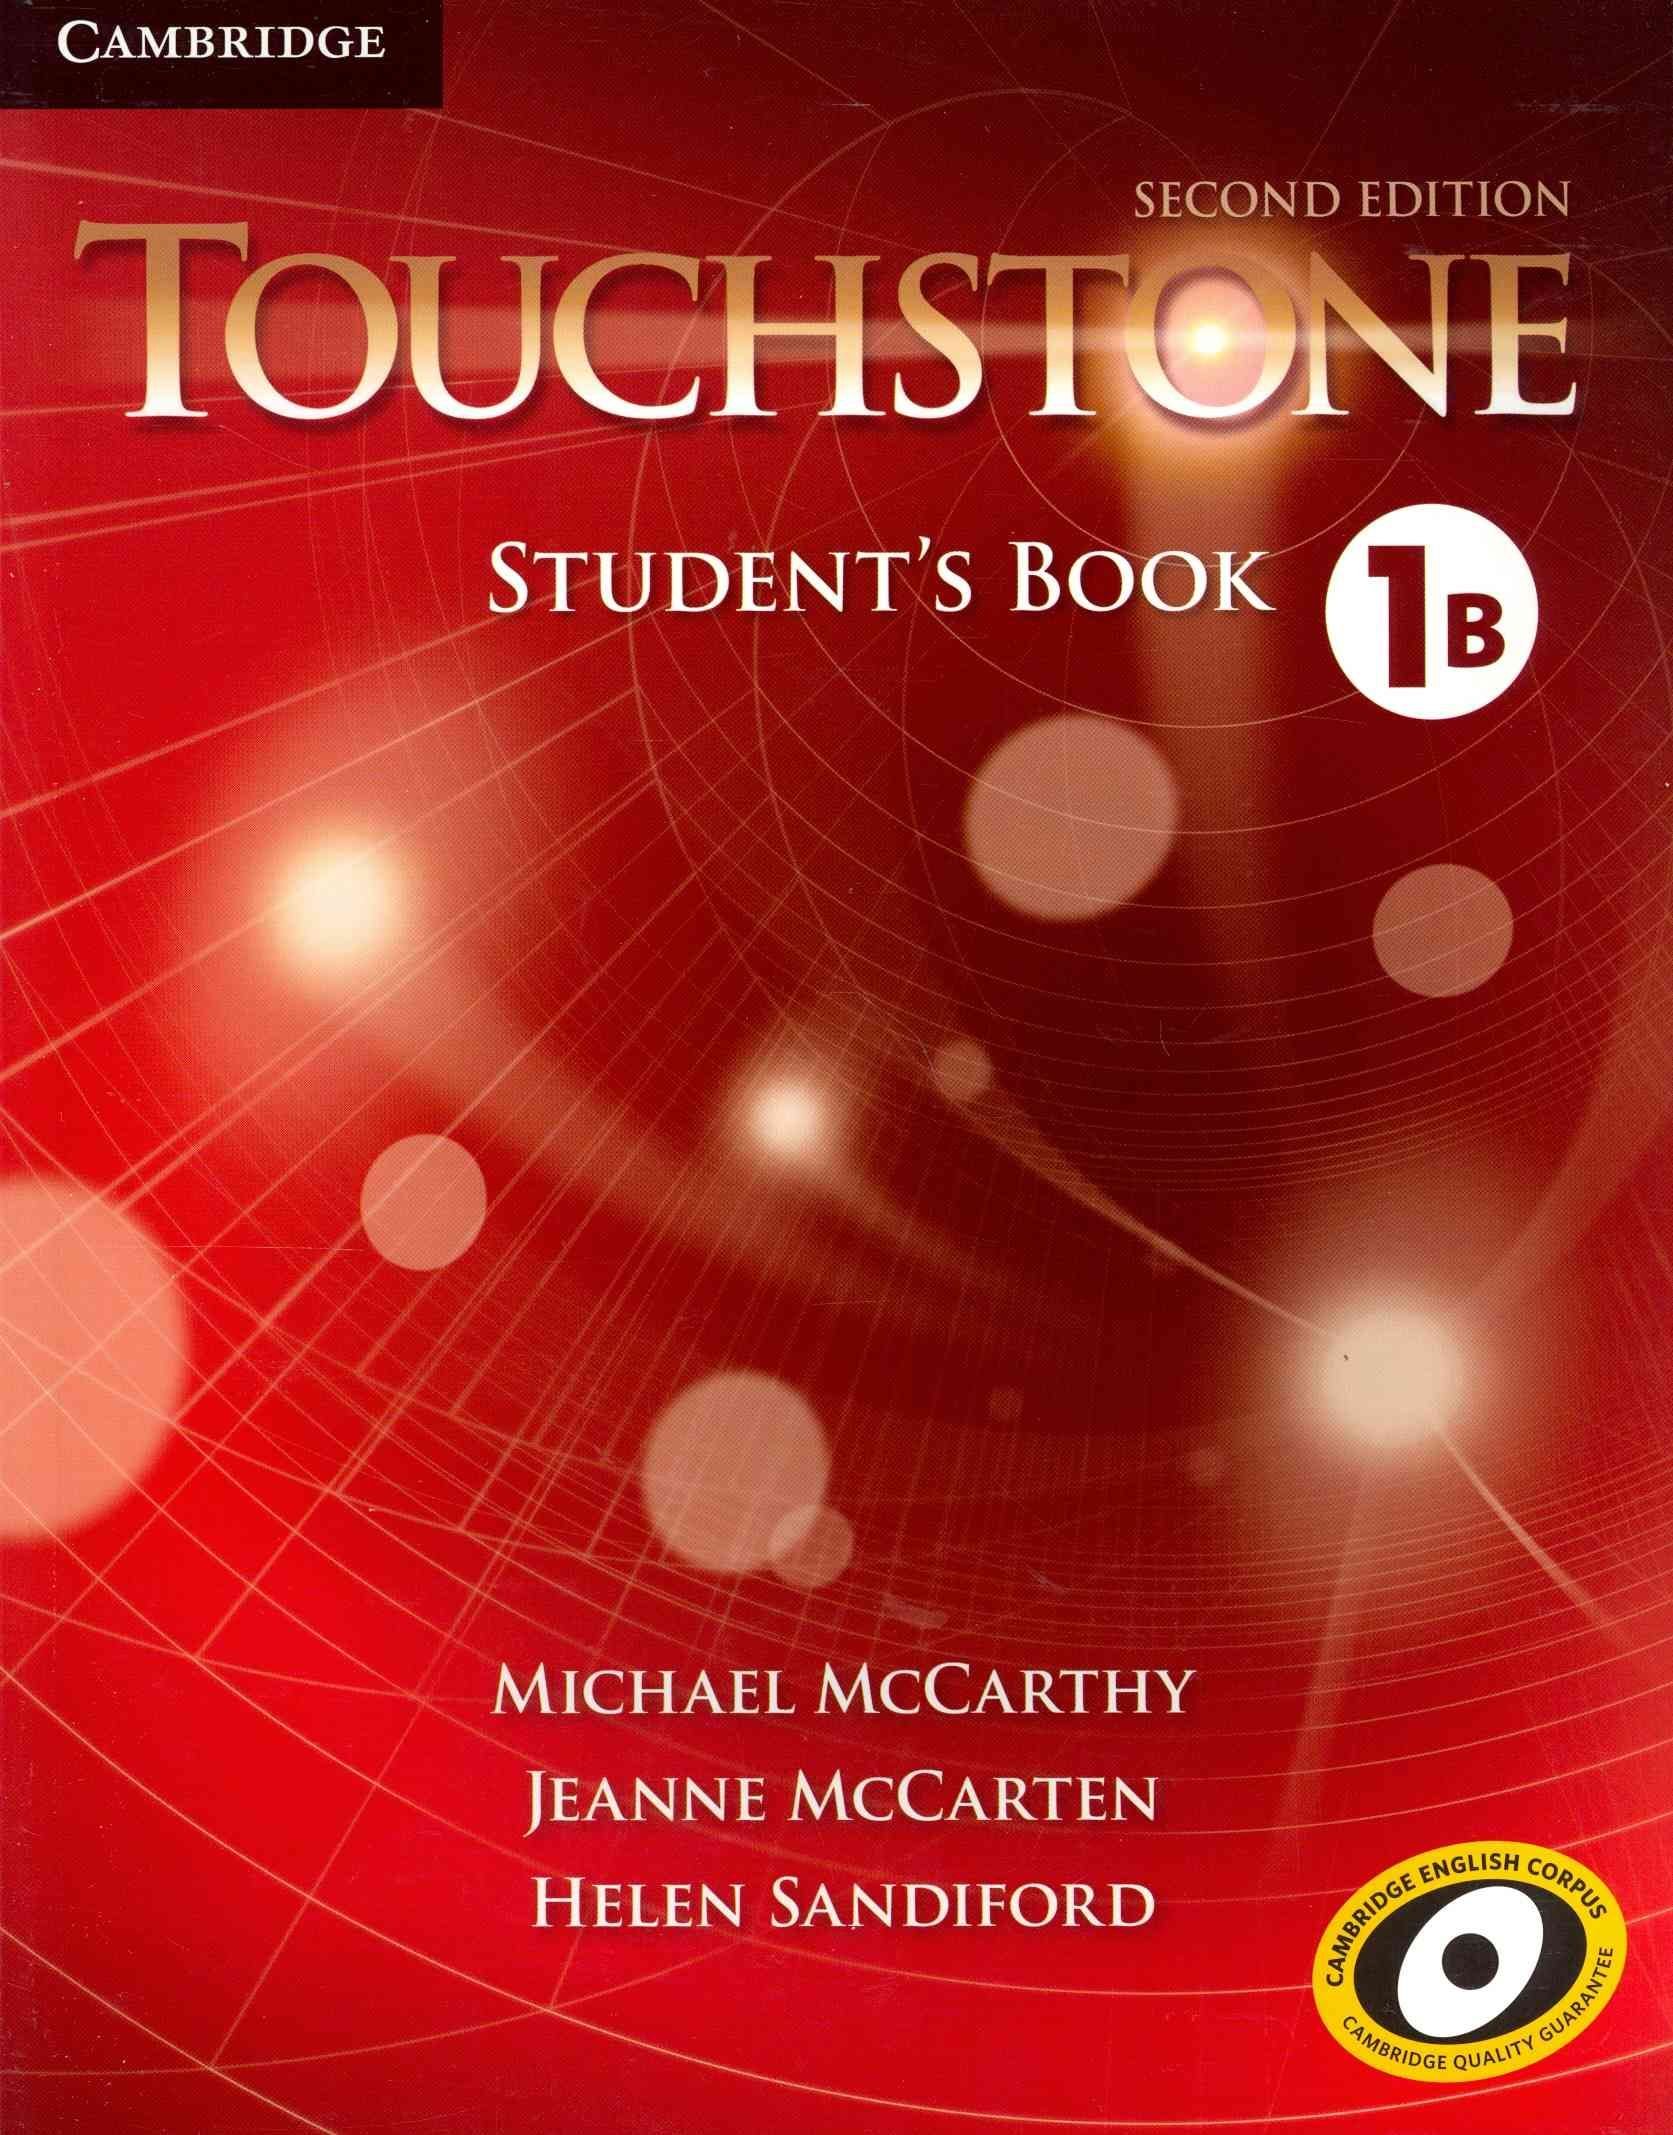 Sandiford　Michael　Jeanne　Free　Book　Student's　Level　McCarthy,　McCarten,　Touchstone.　With　by　Buy　Helen　B　Delivery